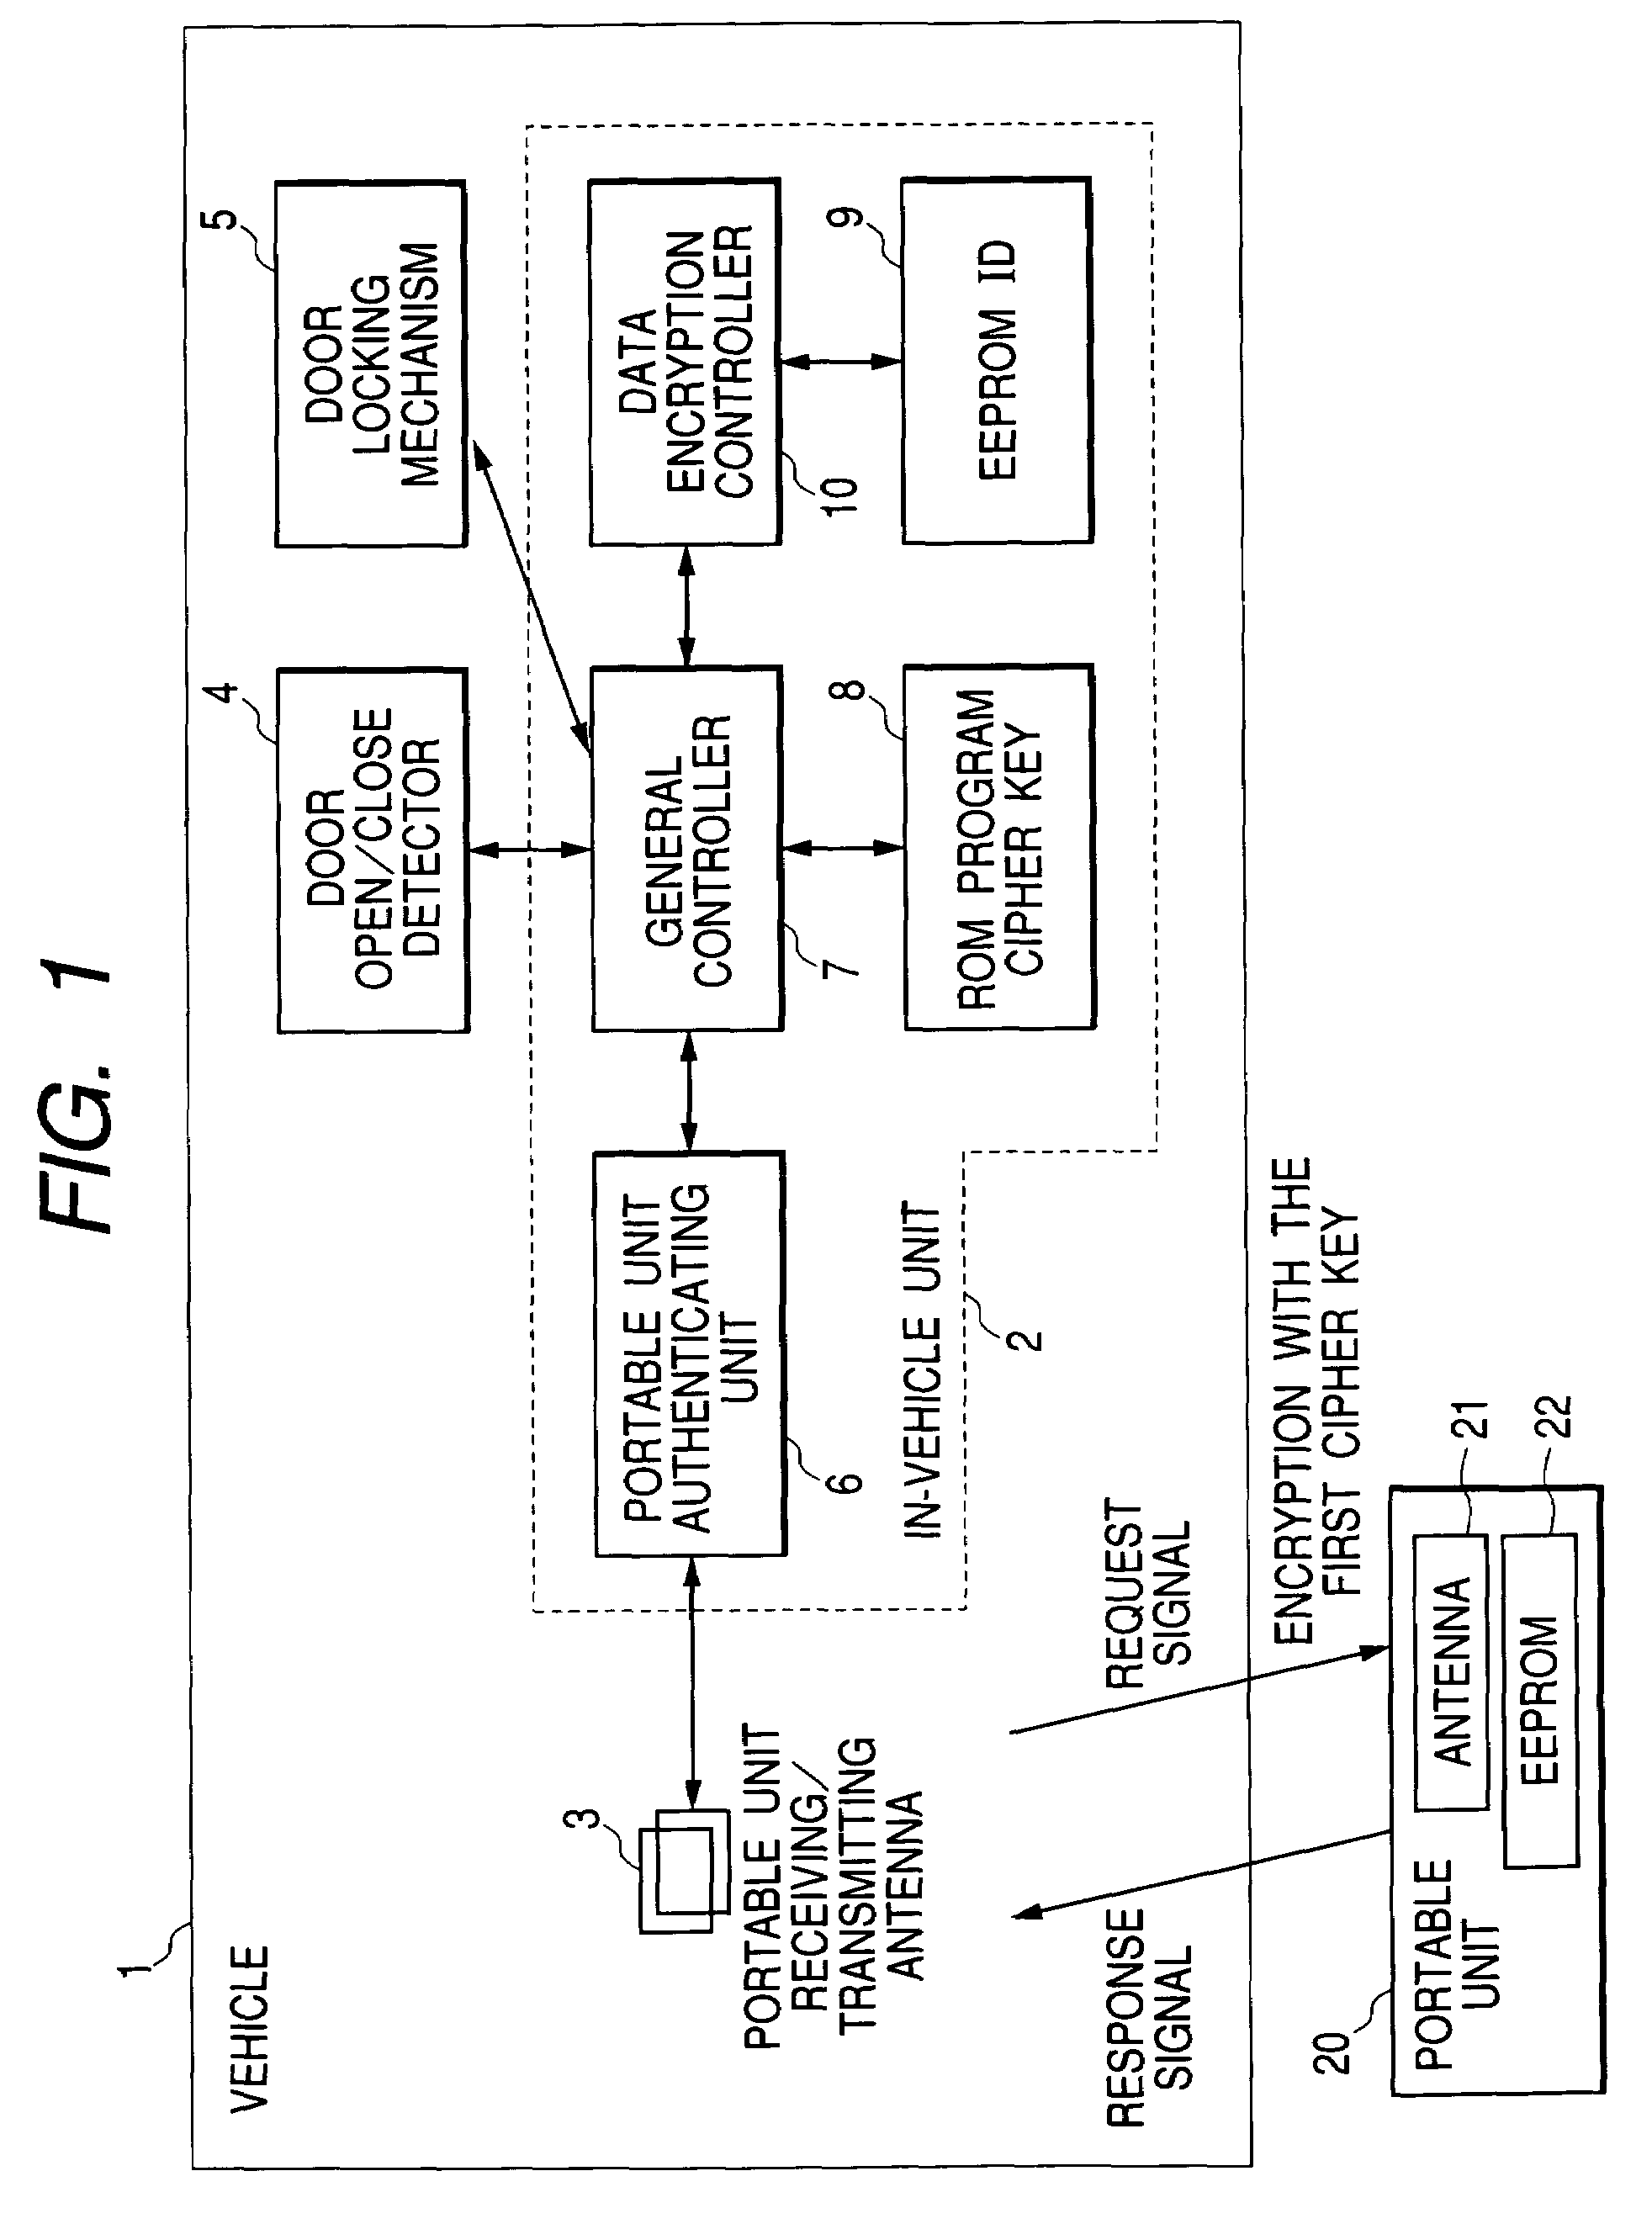 Handling device and method of security data